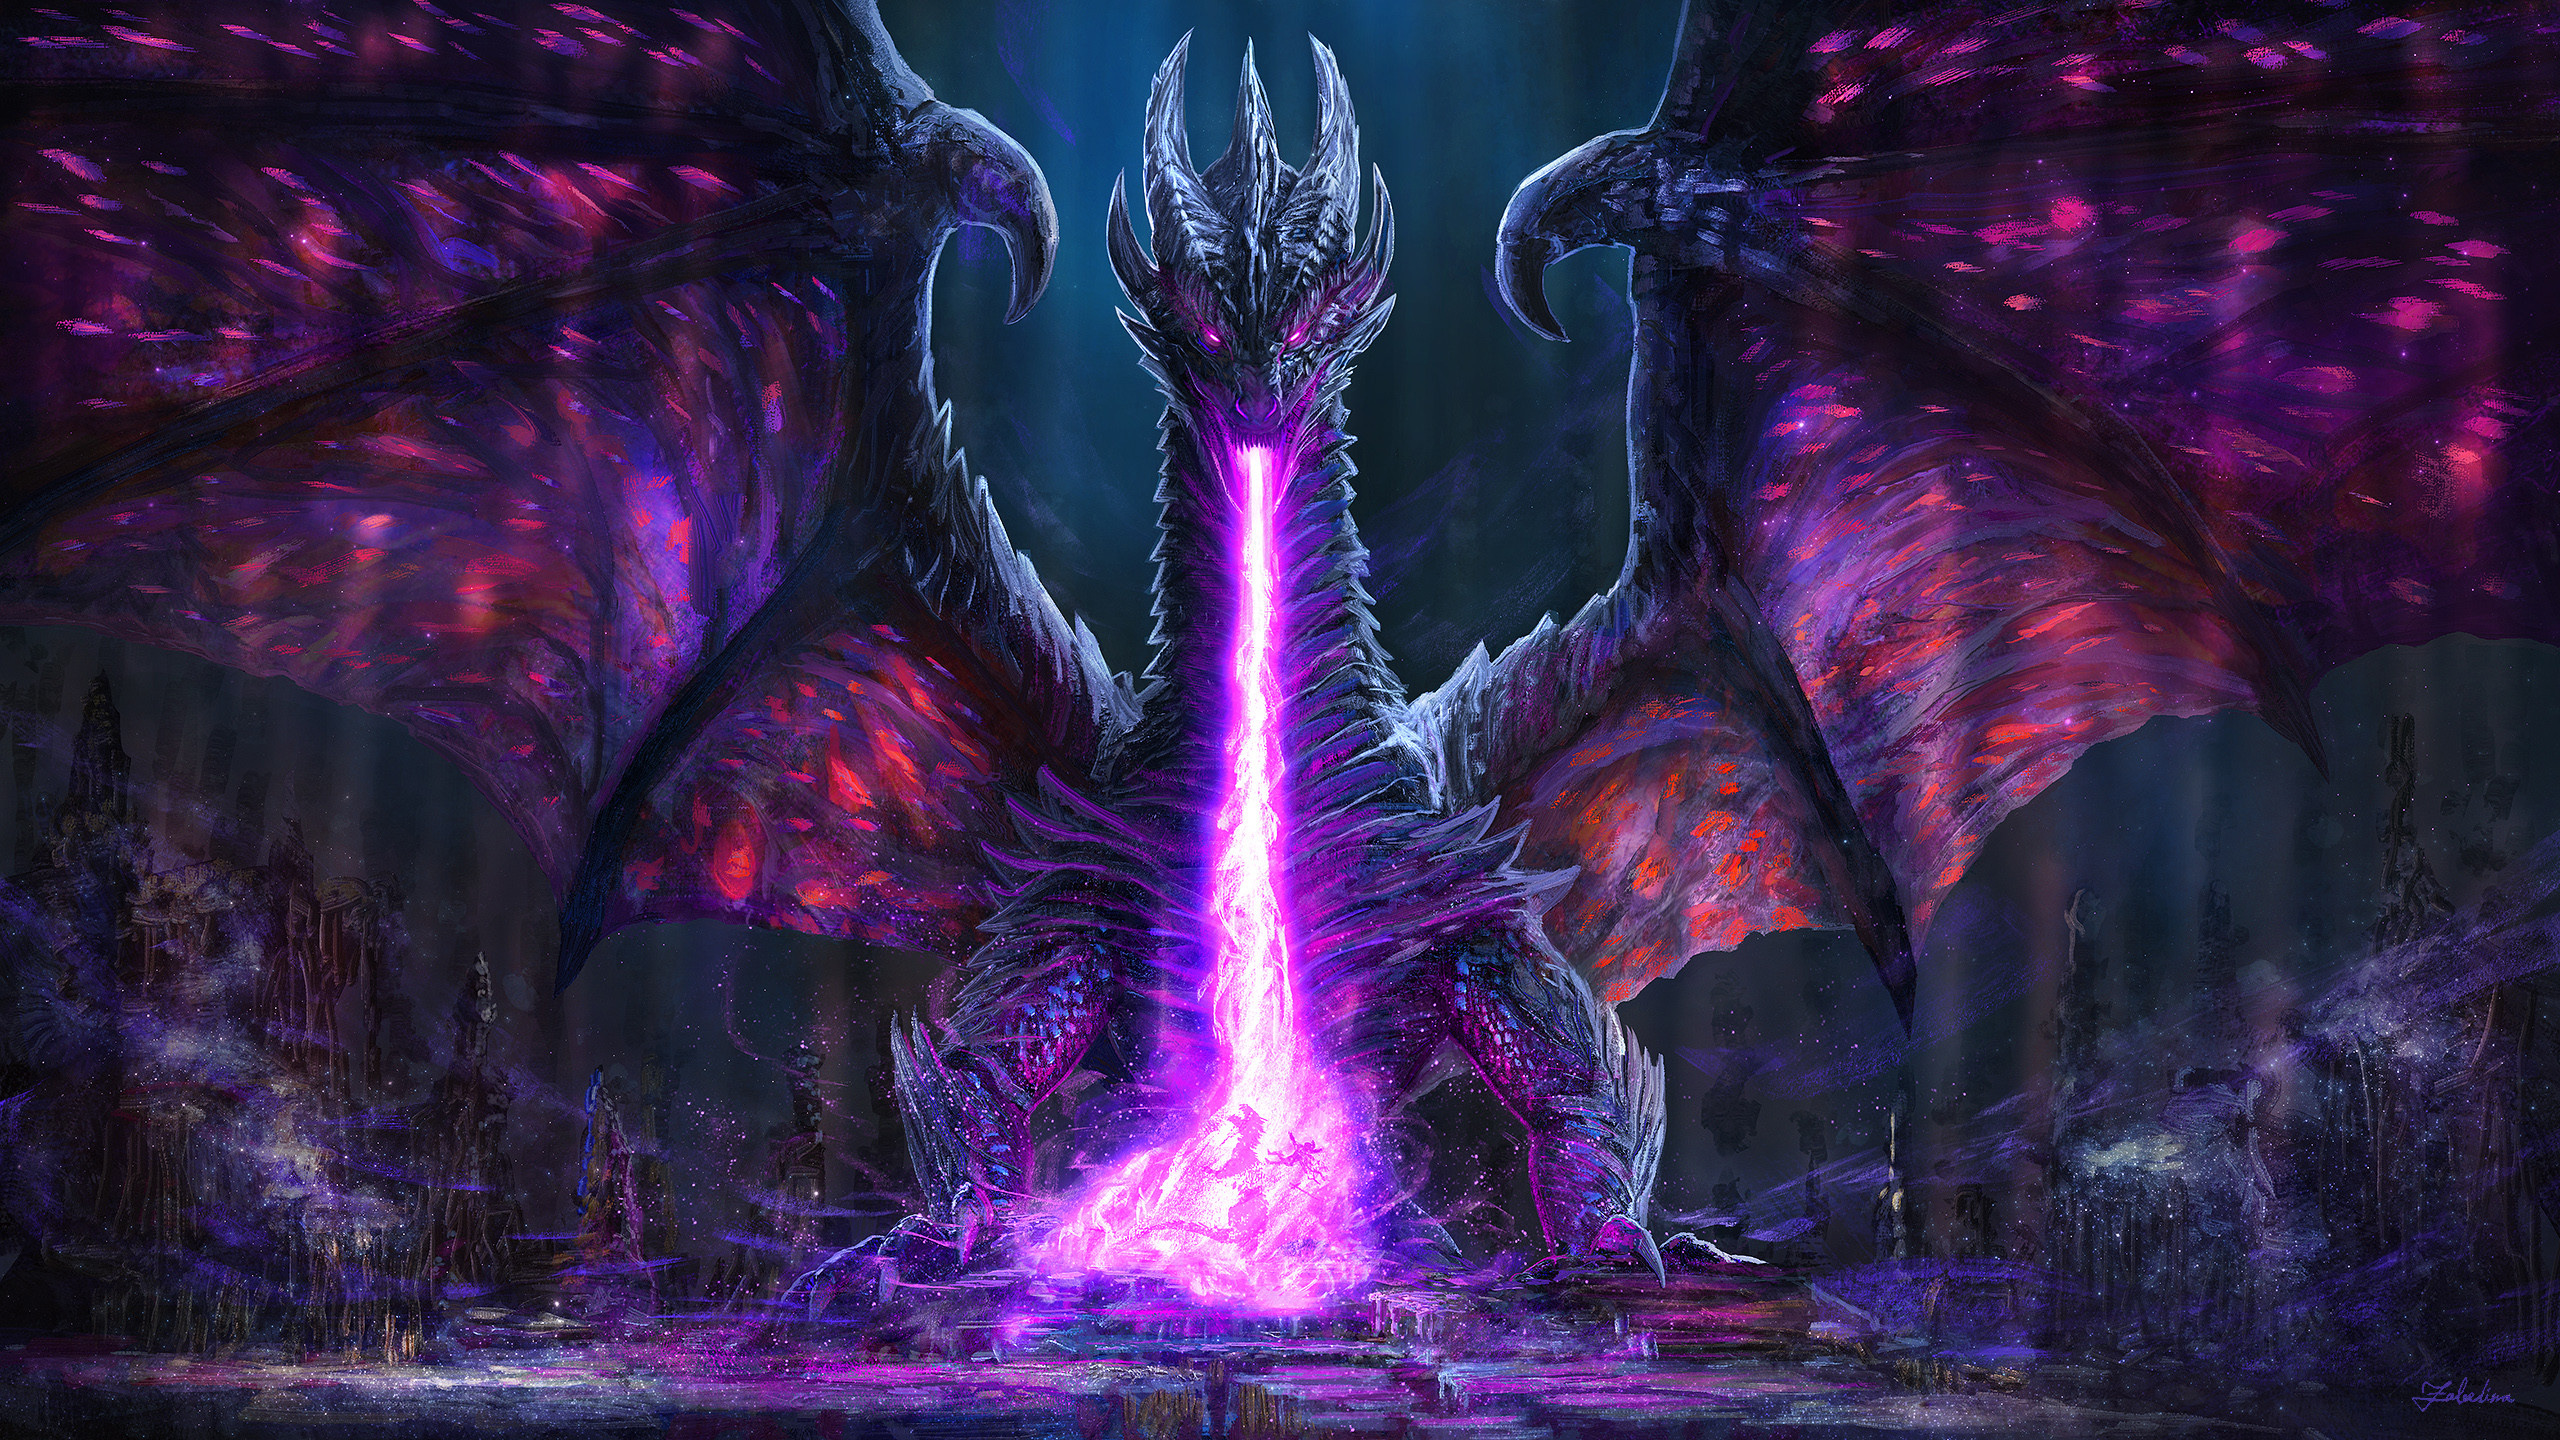 Pink And Purple Dragon Wallpapers